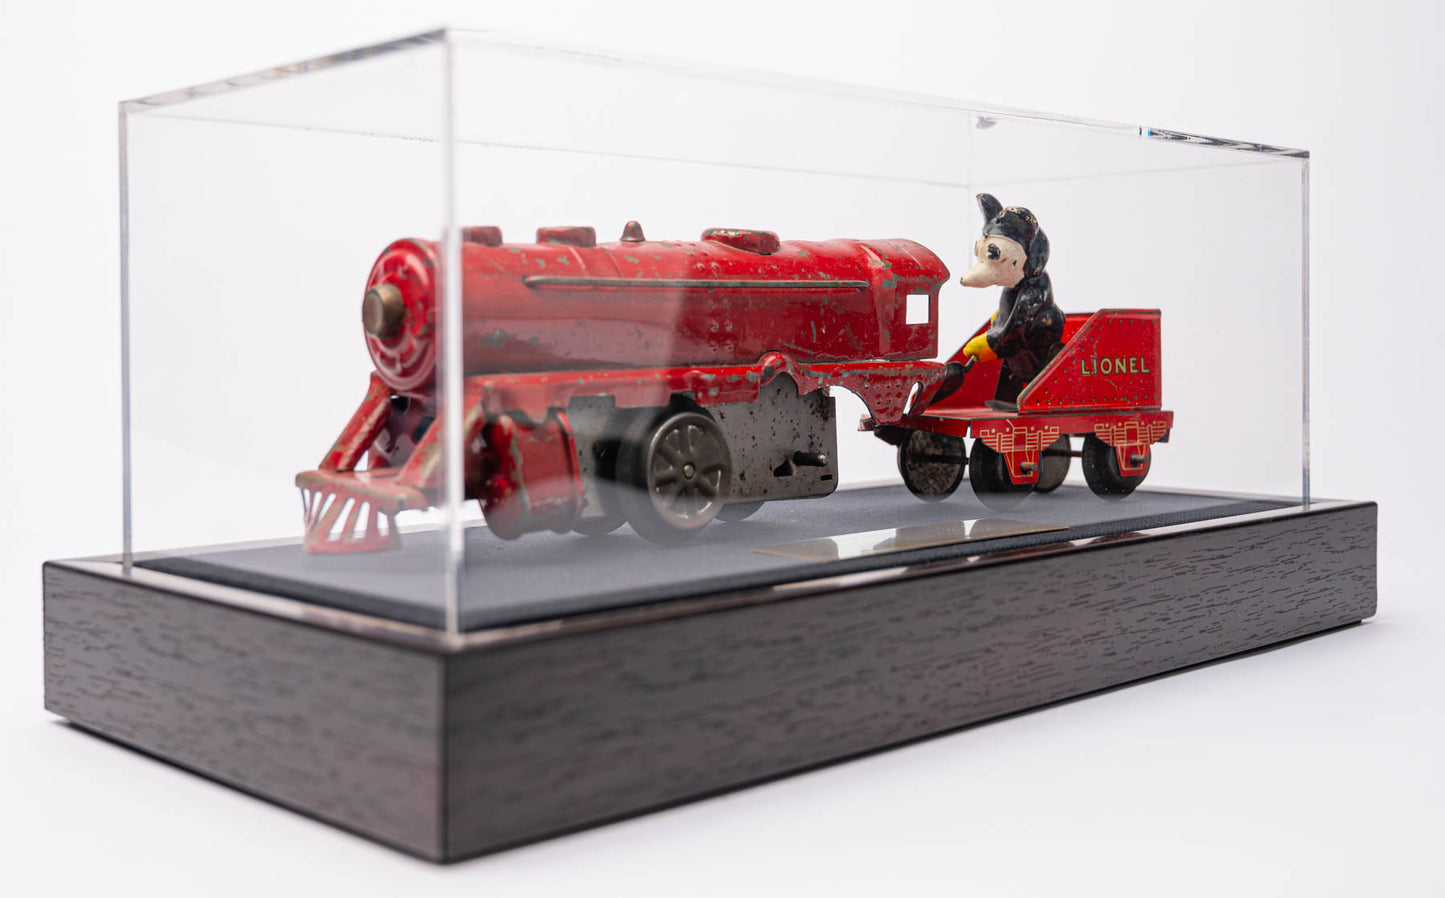 Lionel Mickey Circus Train Stoker Car and Engine.  c.1935